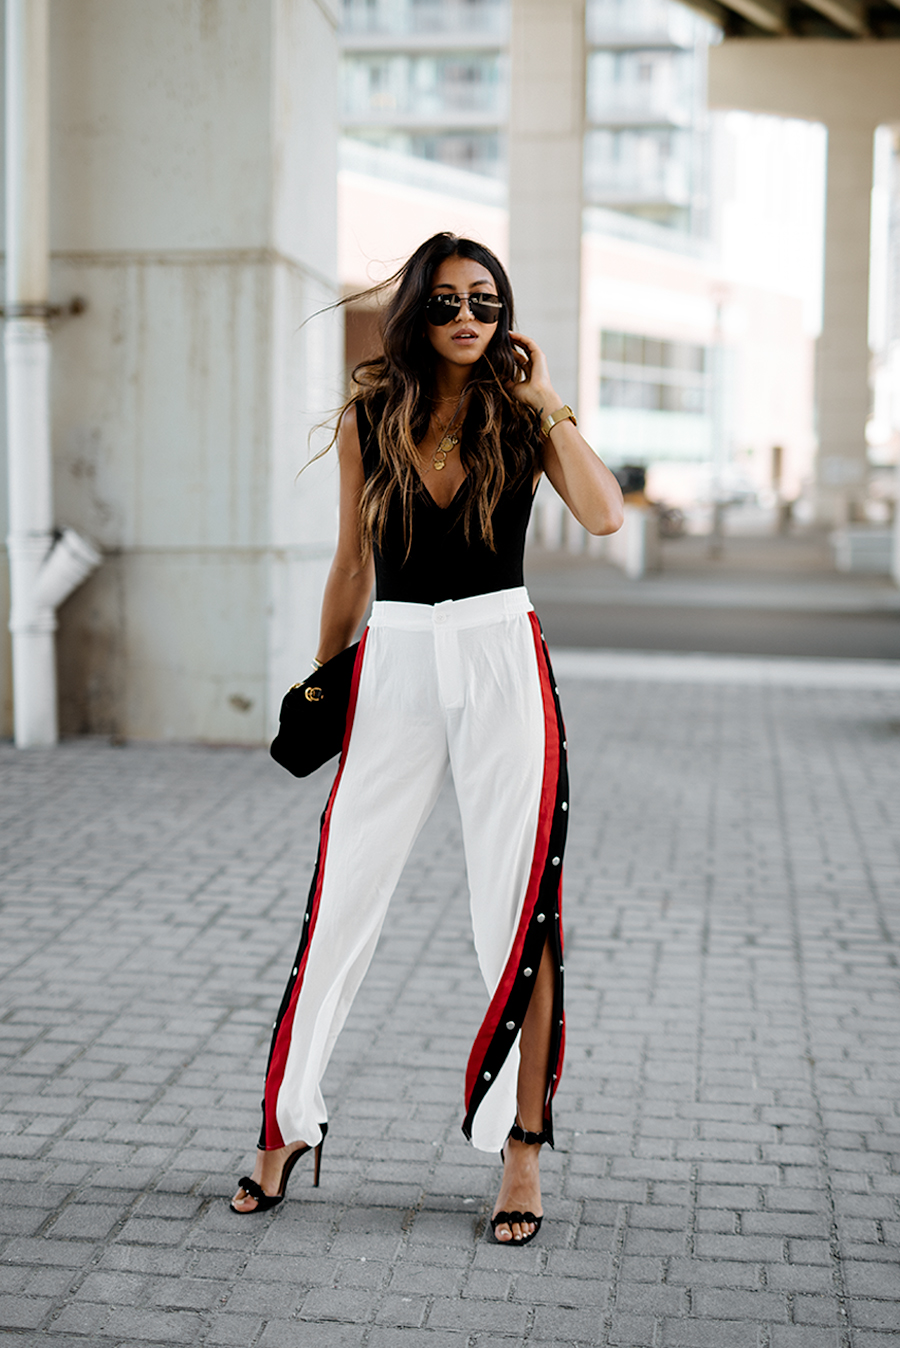 tearaway pant trend alaia heels white black red gucci bag style inspiration trend focus blog blogger fashion kayla seah streetstyle not your standard